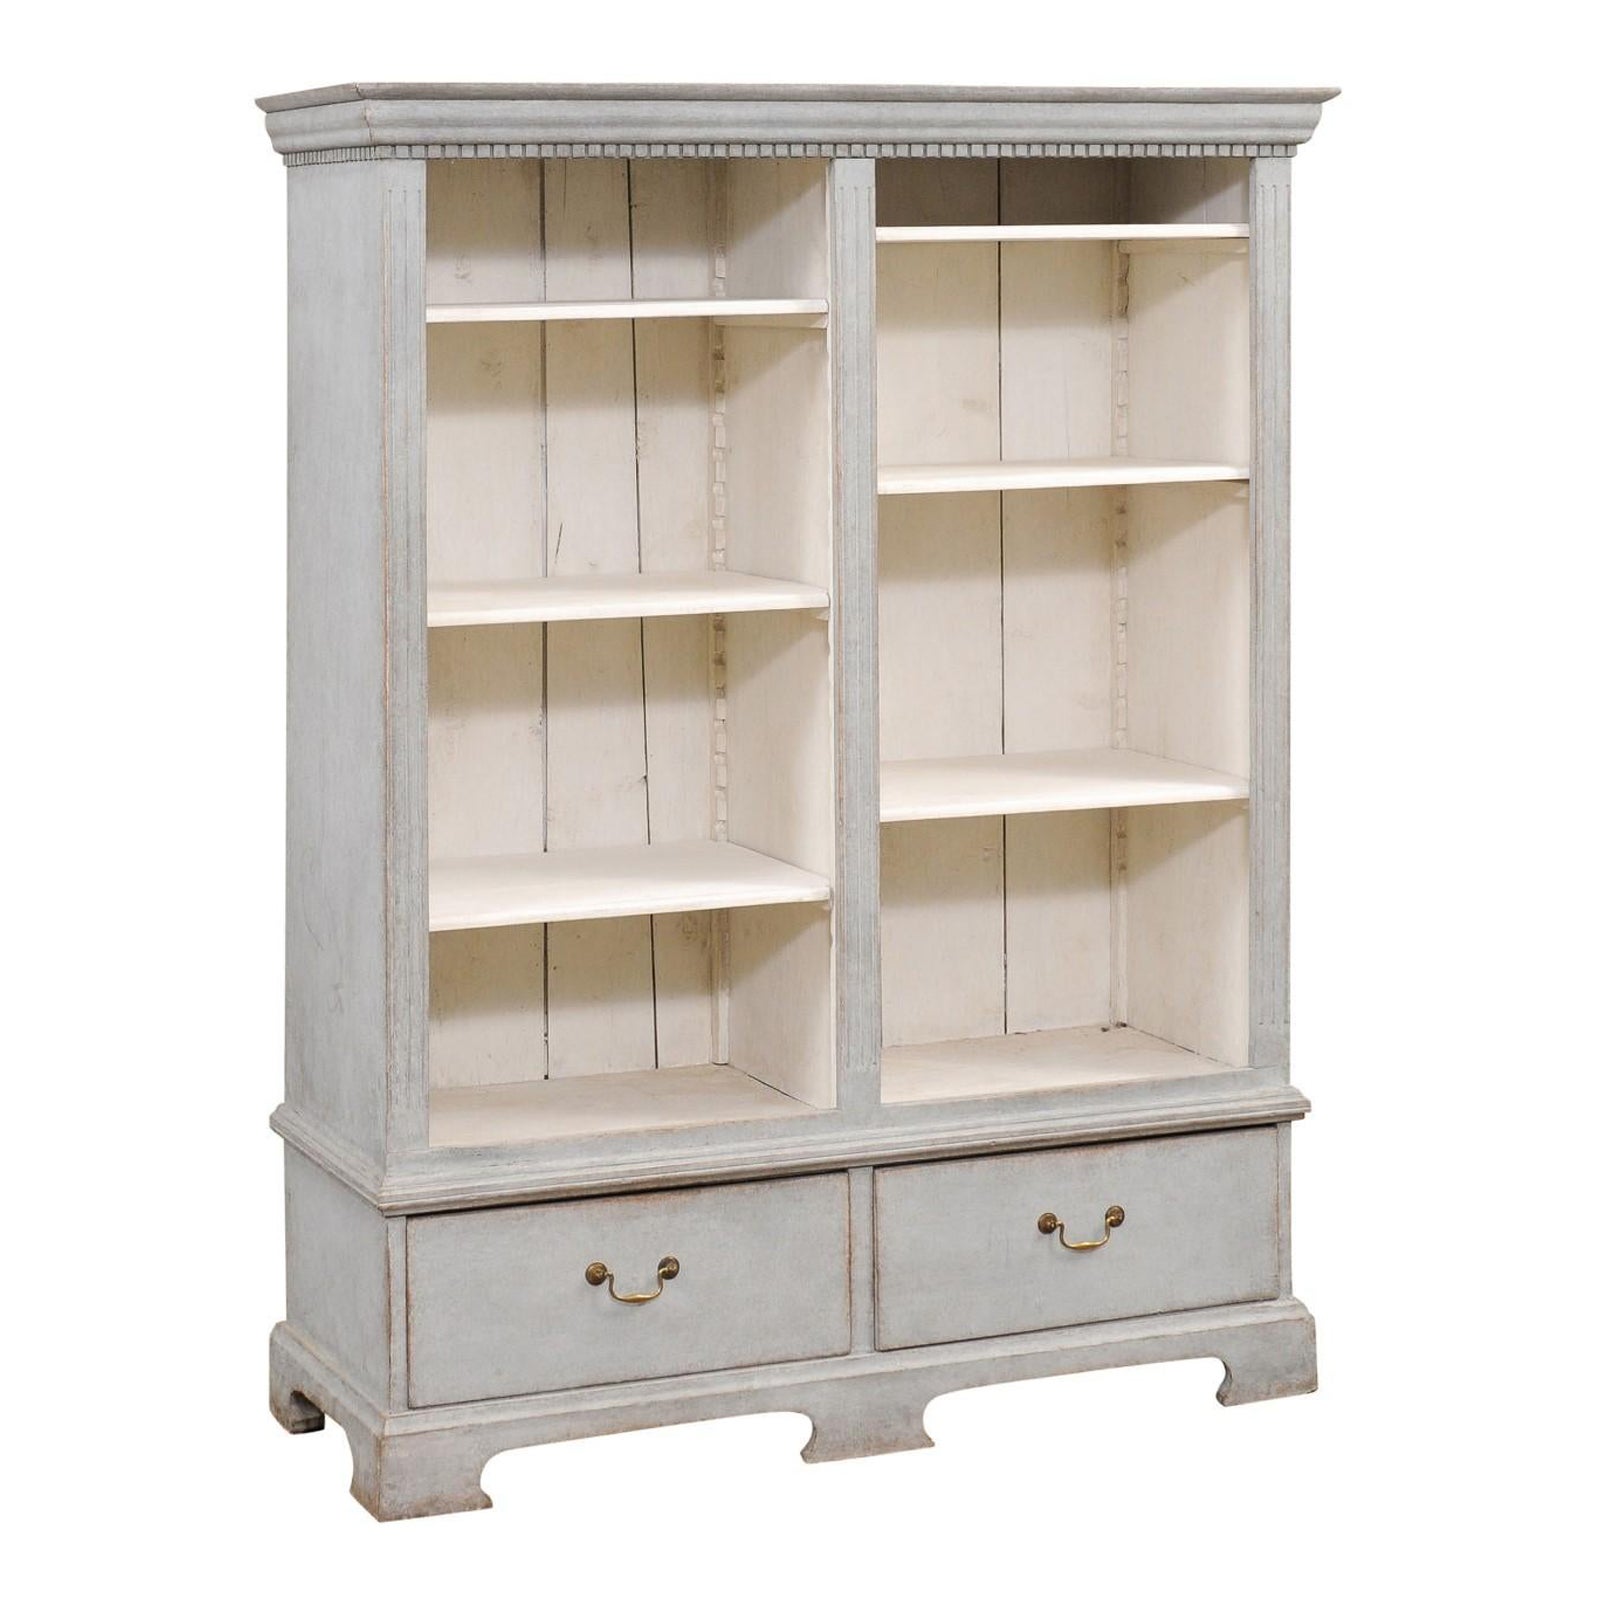  Swedish 1850s Gray Painted Bookcase with Open Shelves and Two Drawers